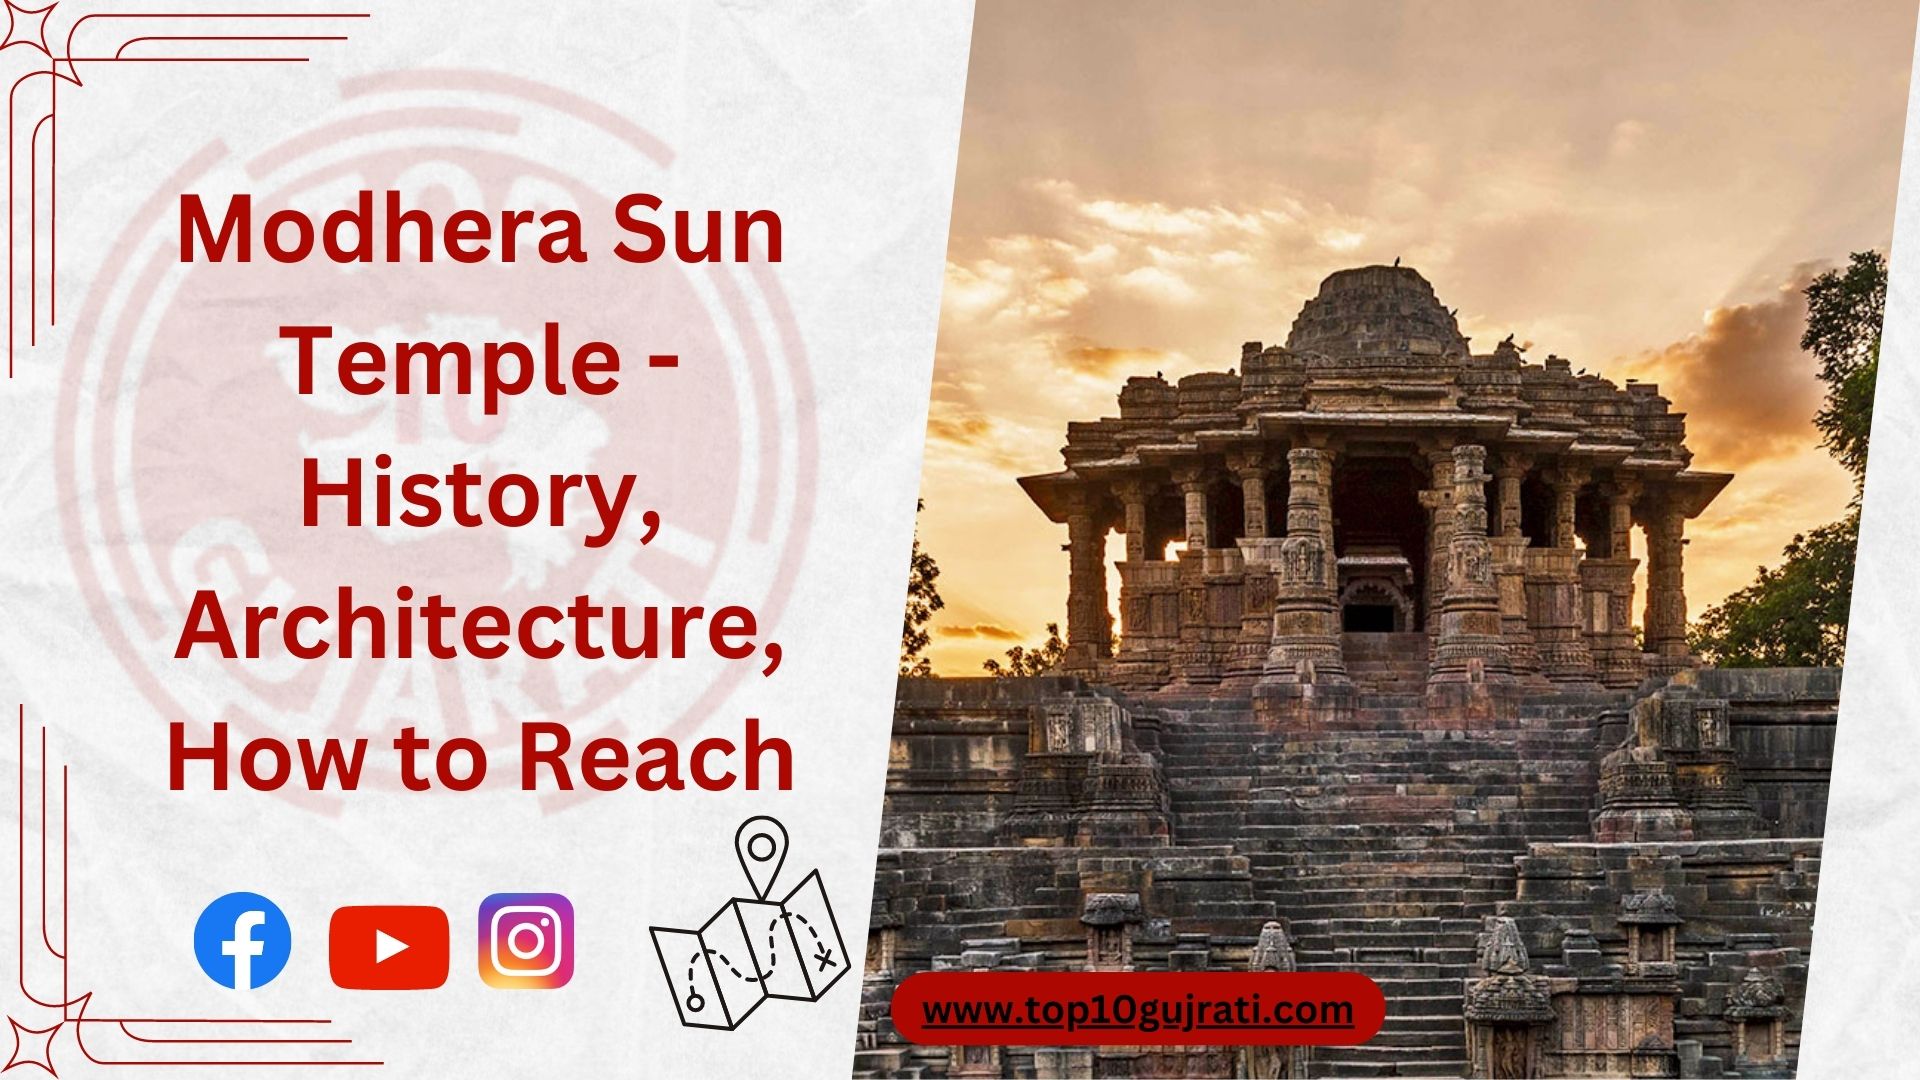 Modhera Sun Temple - History, architecture, How to Reach